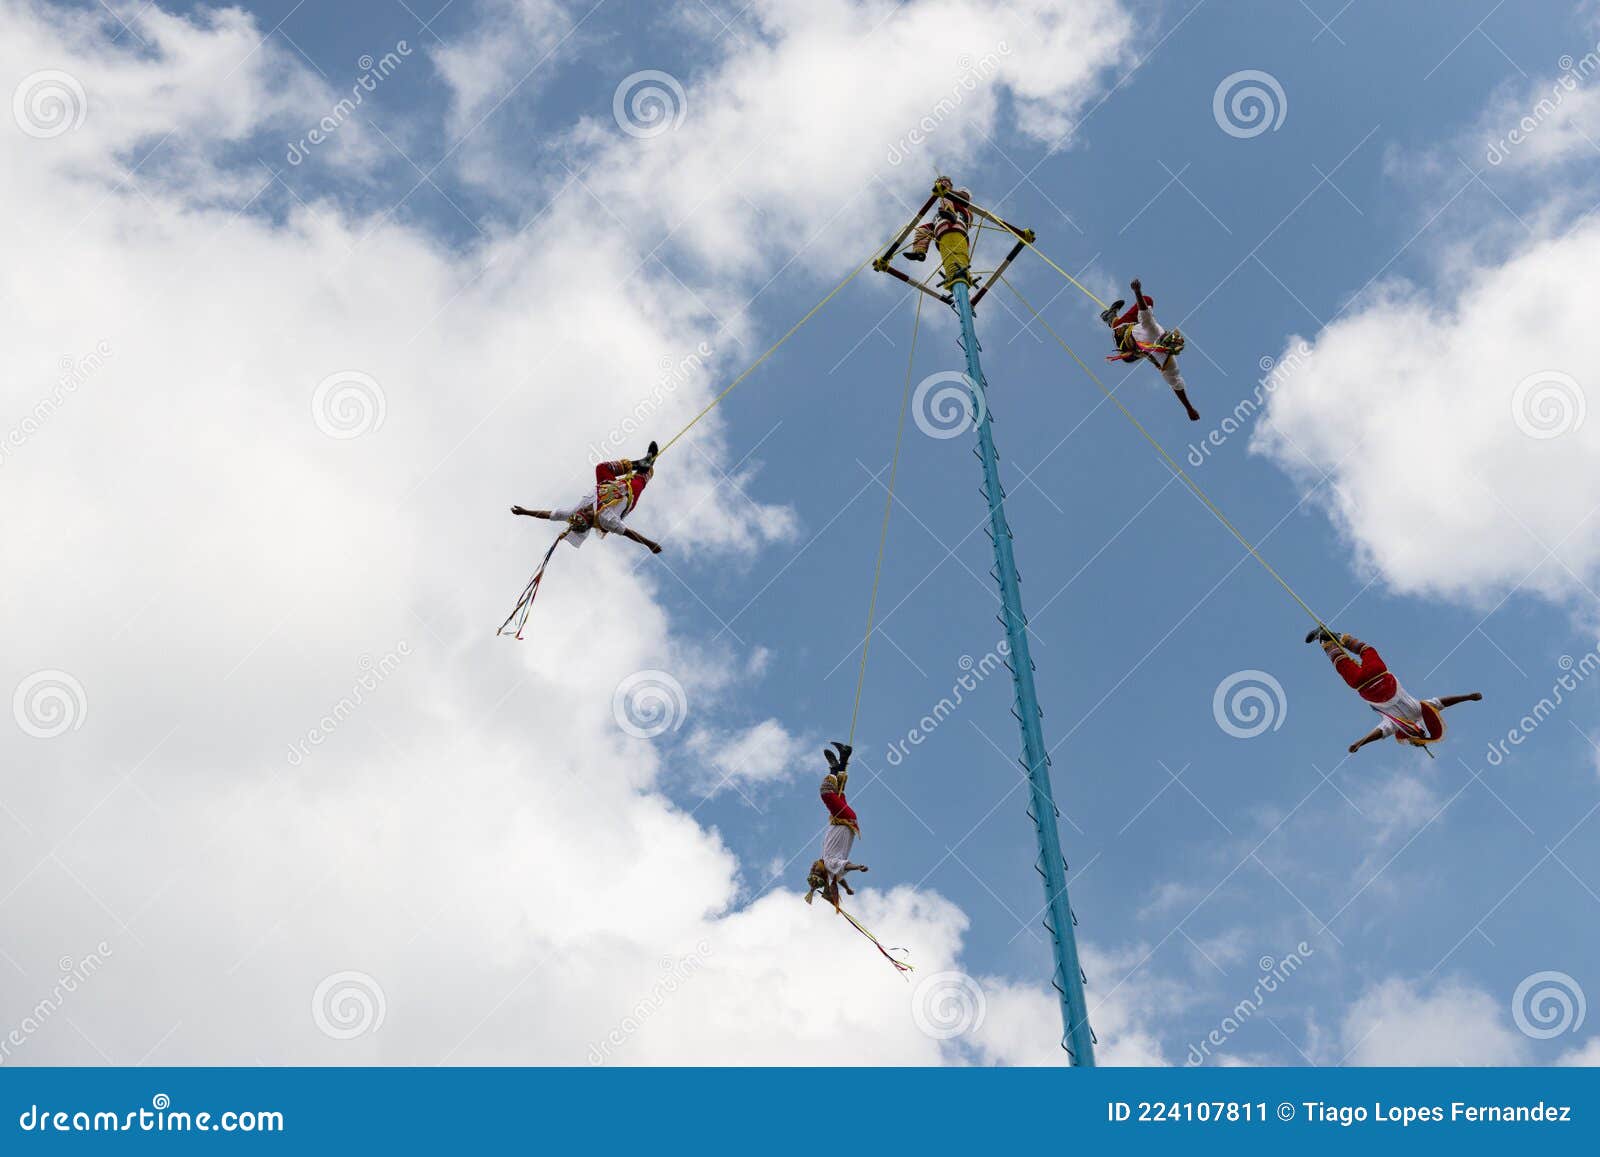 A Group of Voladores Flyers Climbing the Pole To Perform the